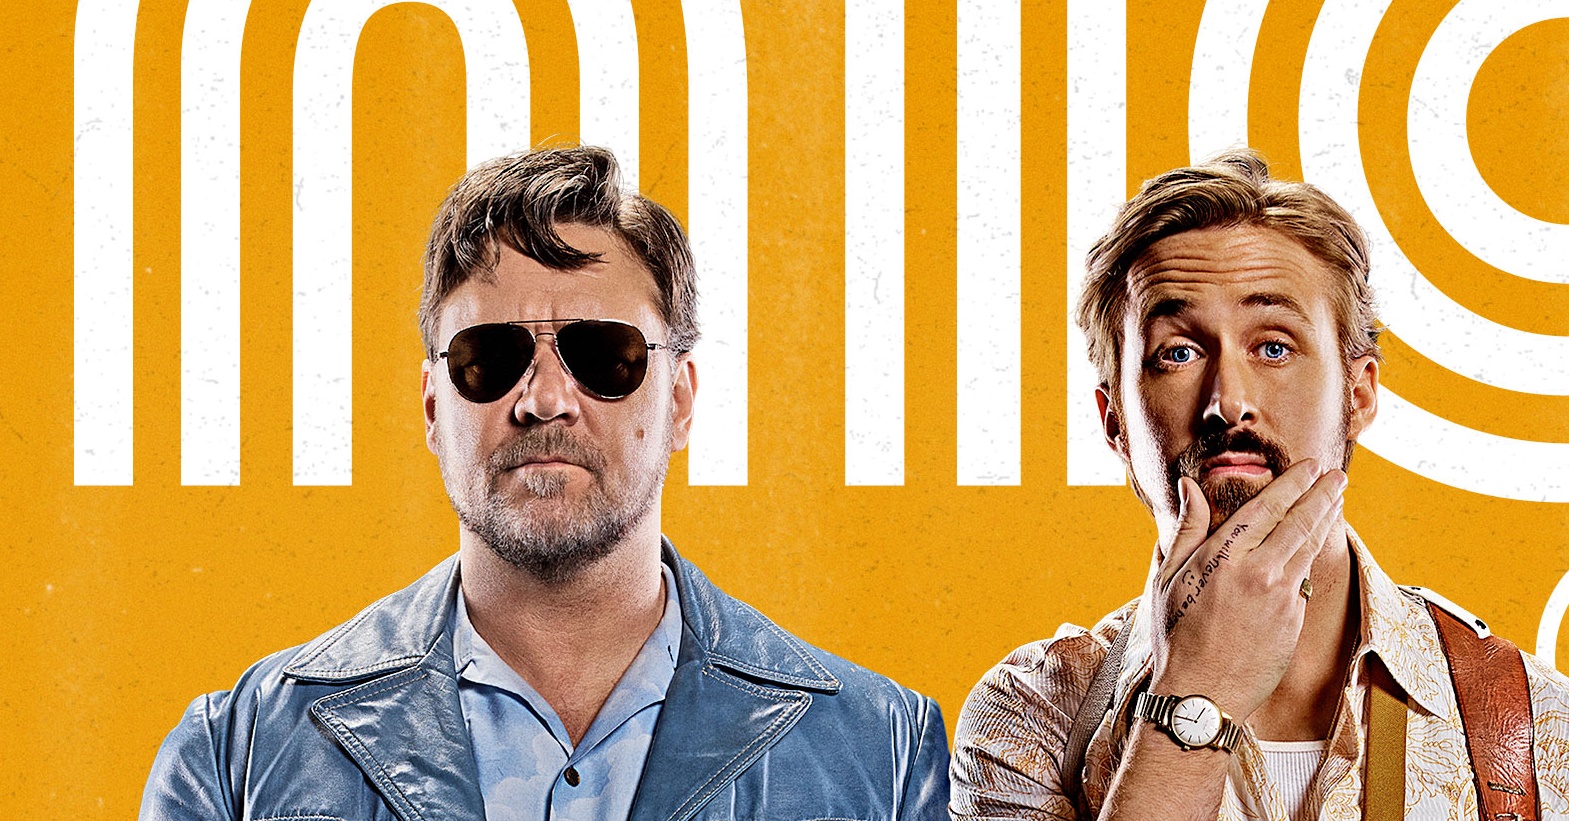 The nice guys: must see of the summer